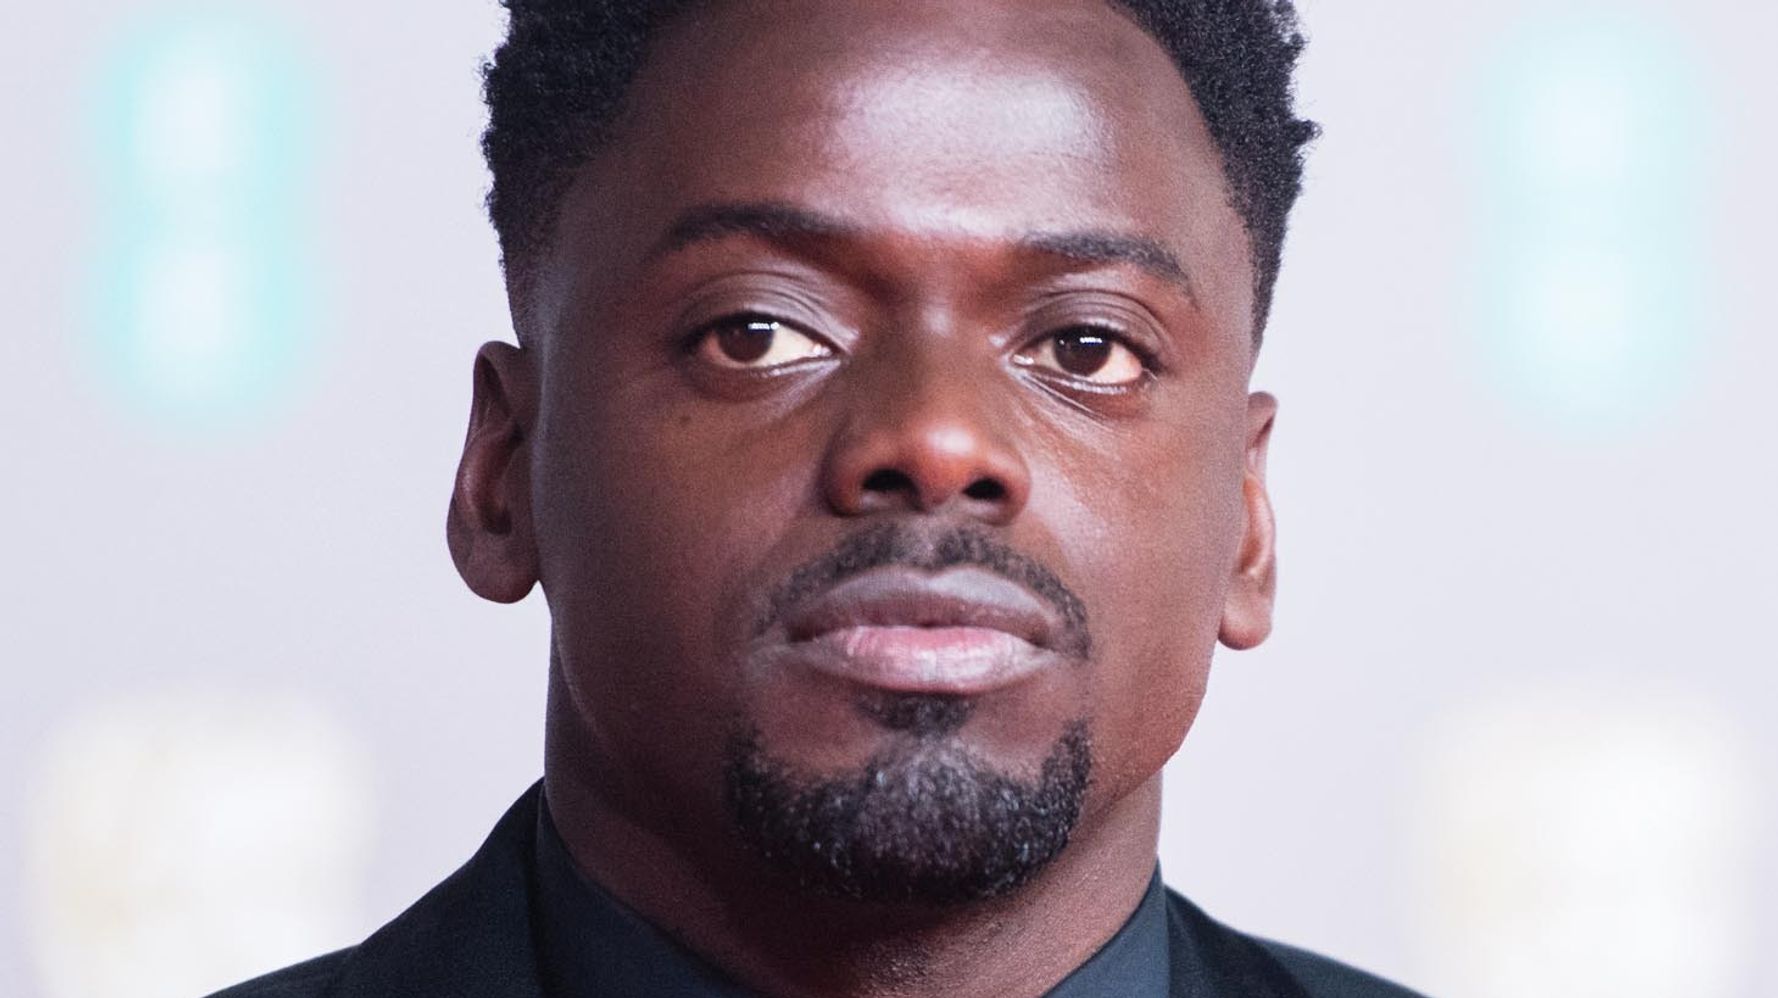 Daniel Kaluuya says he was not invited to the “Get Out” premiere